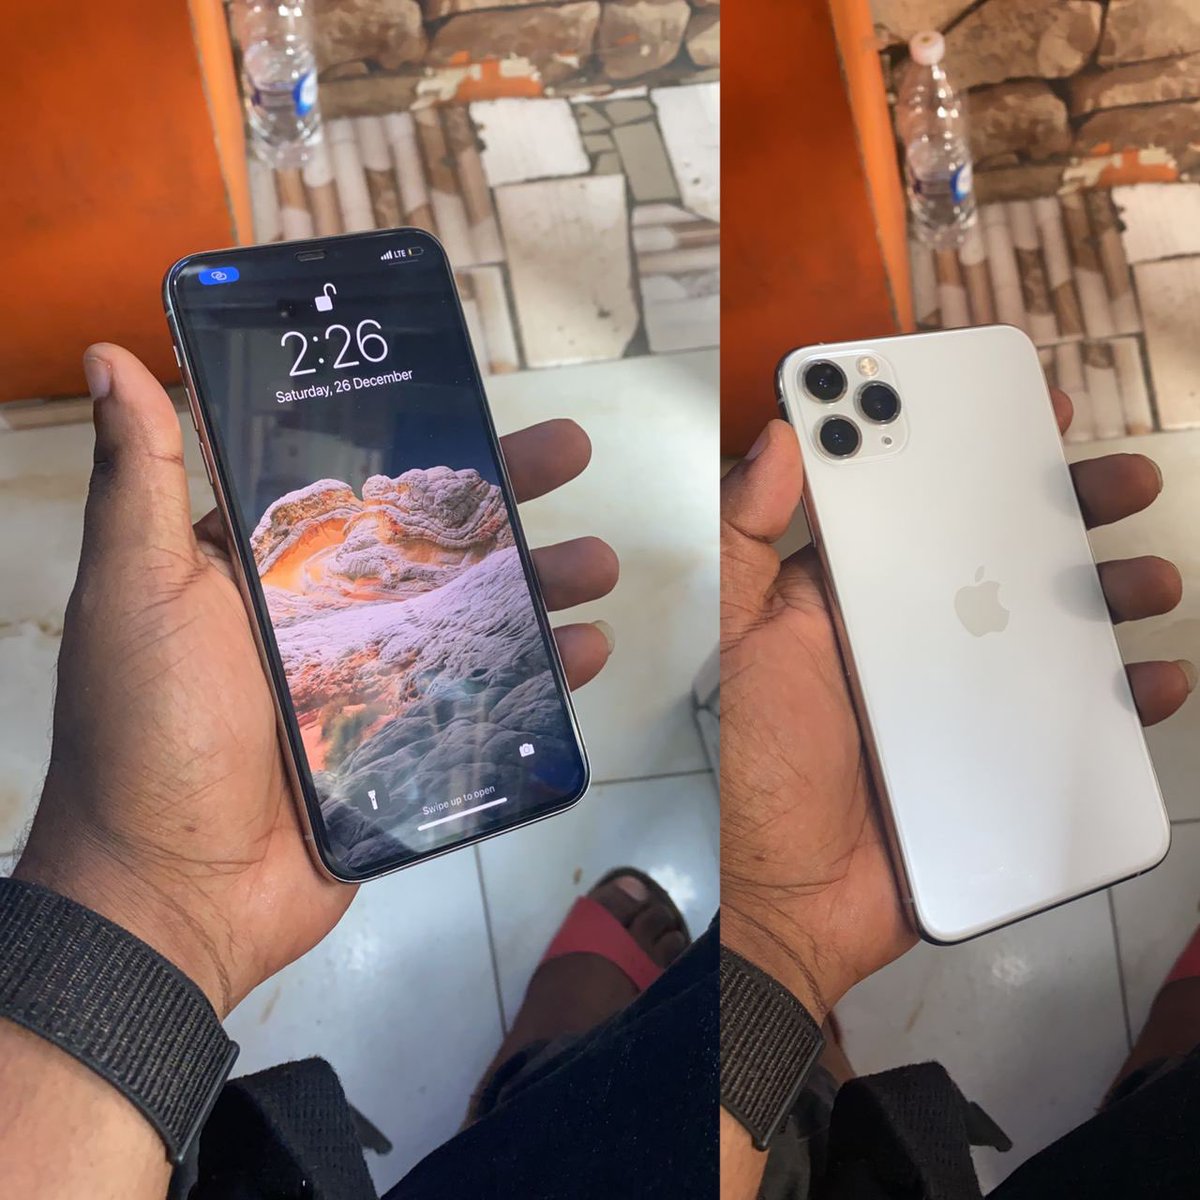 The Plug Phones On Twitter Iphone 11pro Max 256gb Sliver Color Semi Unlock Temporary Unlocked Battery Life 87 Cool Chop Swapping Is Allowed Whatsapp Call 0540622643 Serenadebykidi Kwame Poku